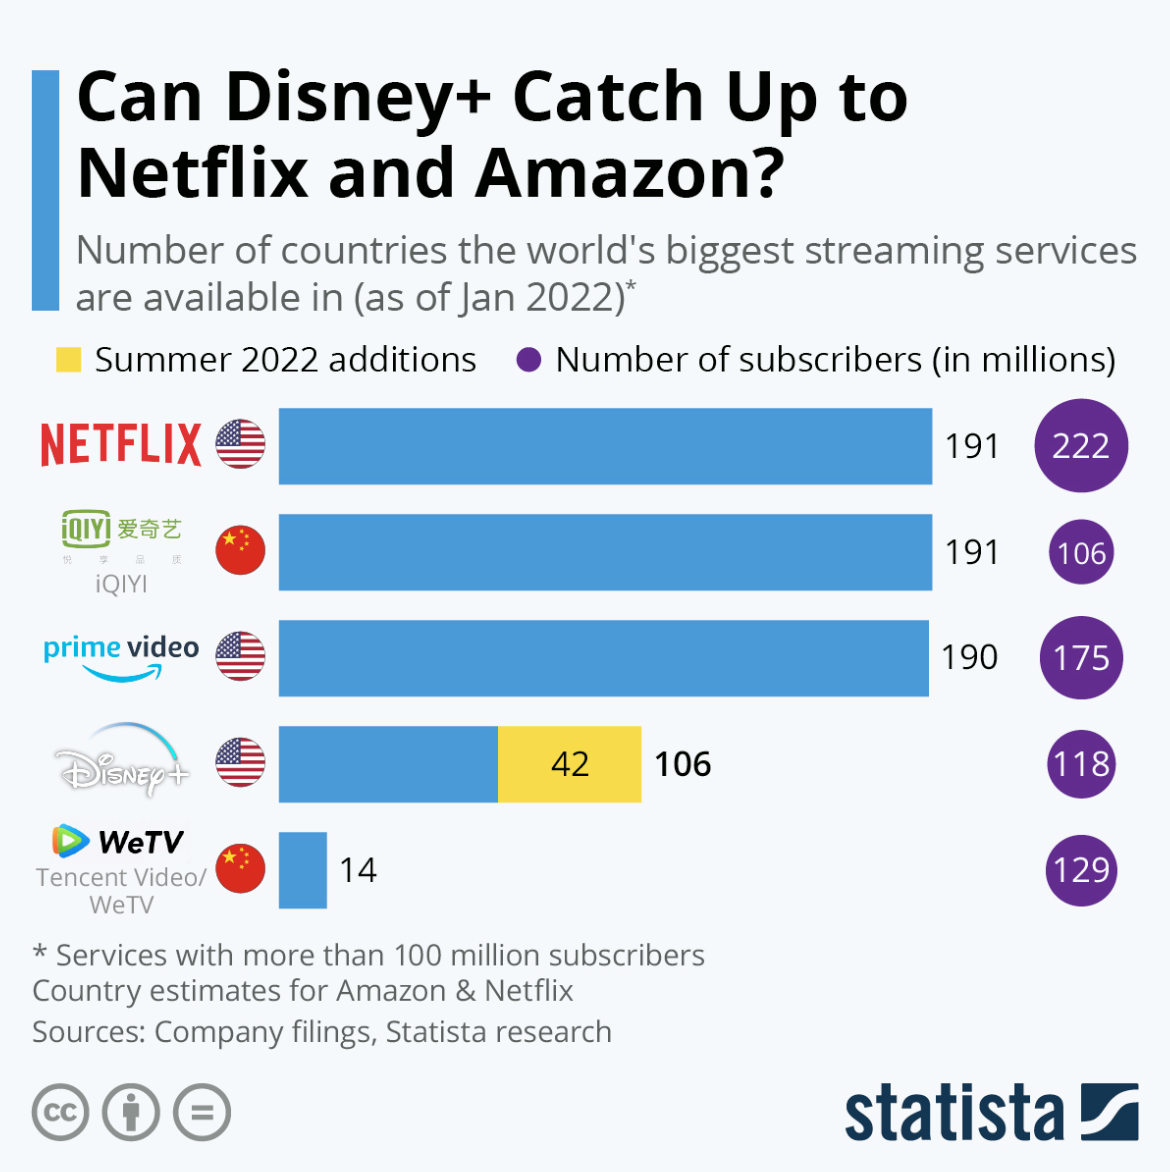 The world’s biggest streaming services available in 2022.